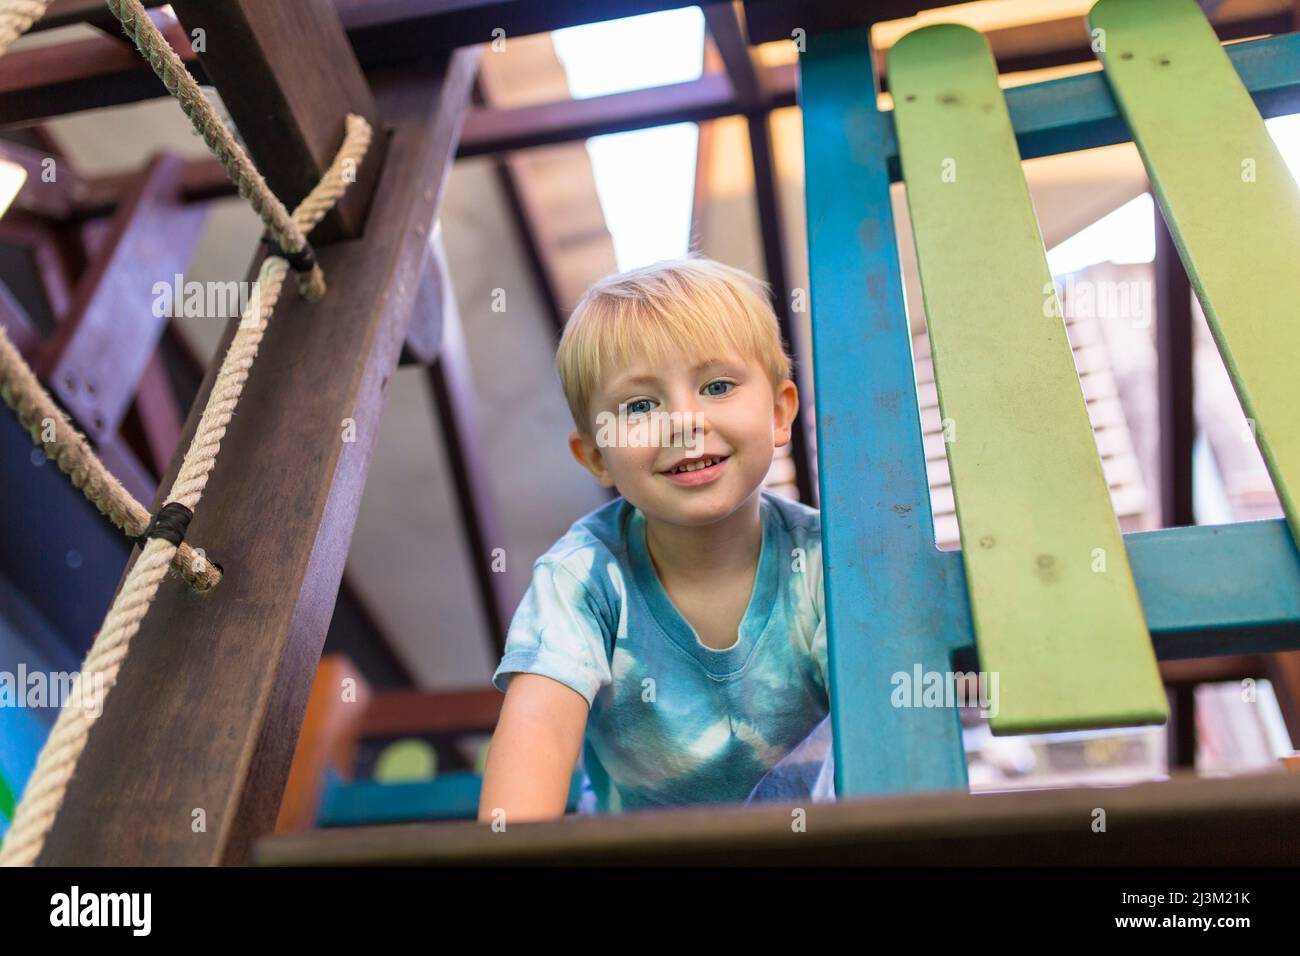 Young boy with blue eyes and blond hair looks down at the camera while climbing on a play structure in a park; Vientiane, Vientiane Prefecture, Laos Stock Photo